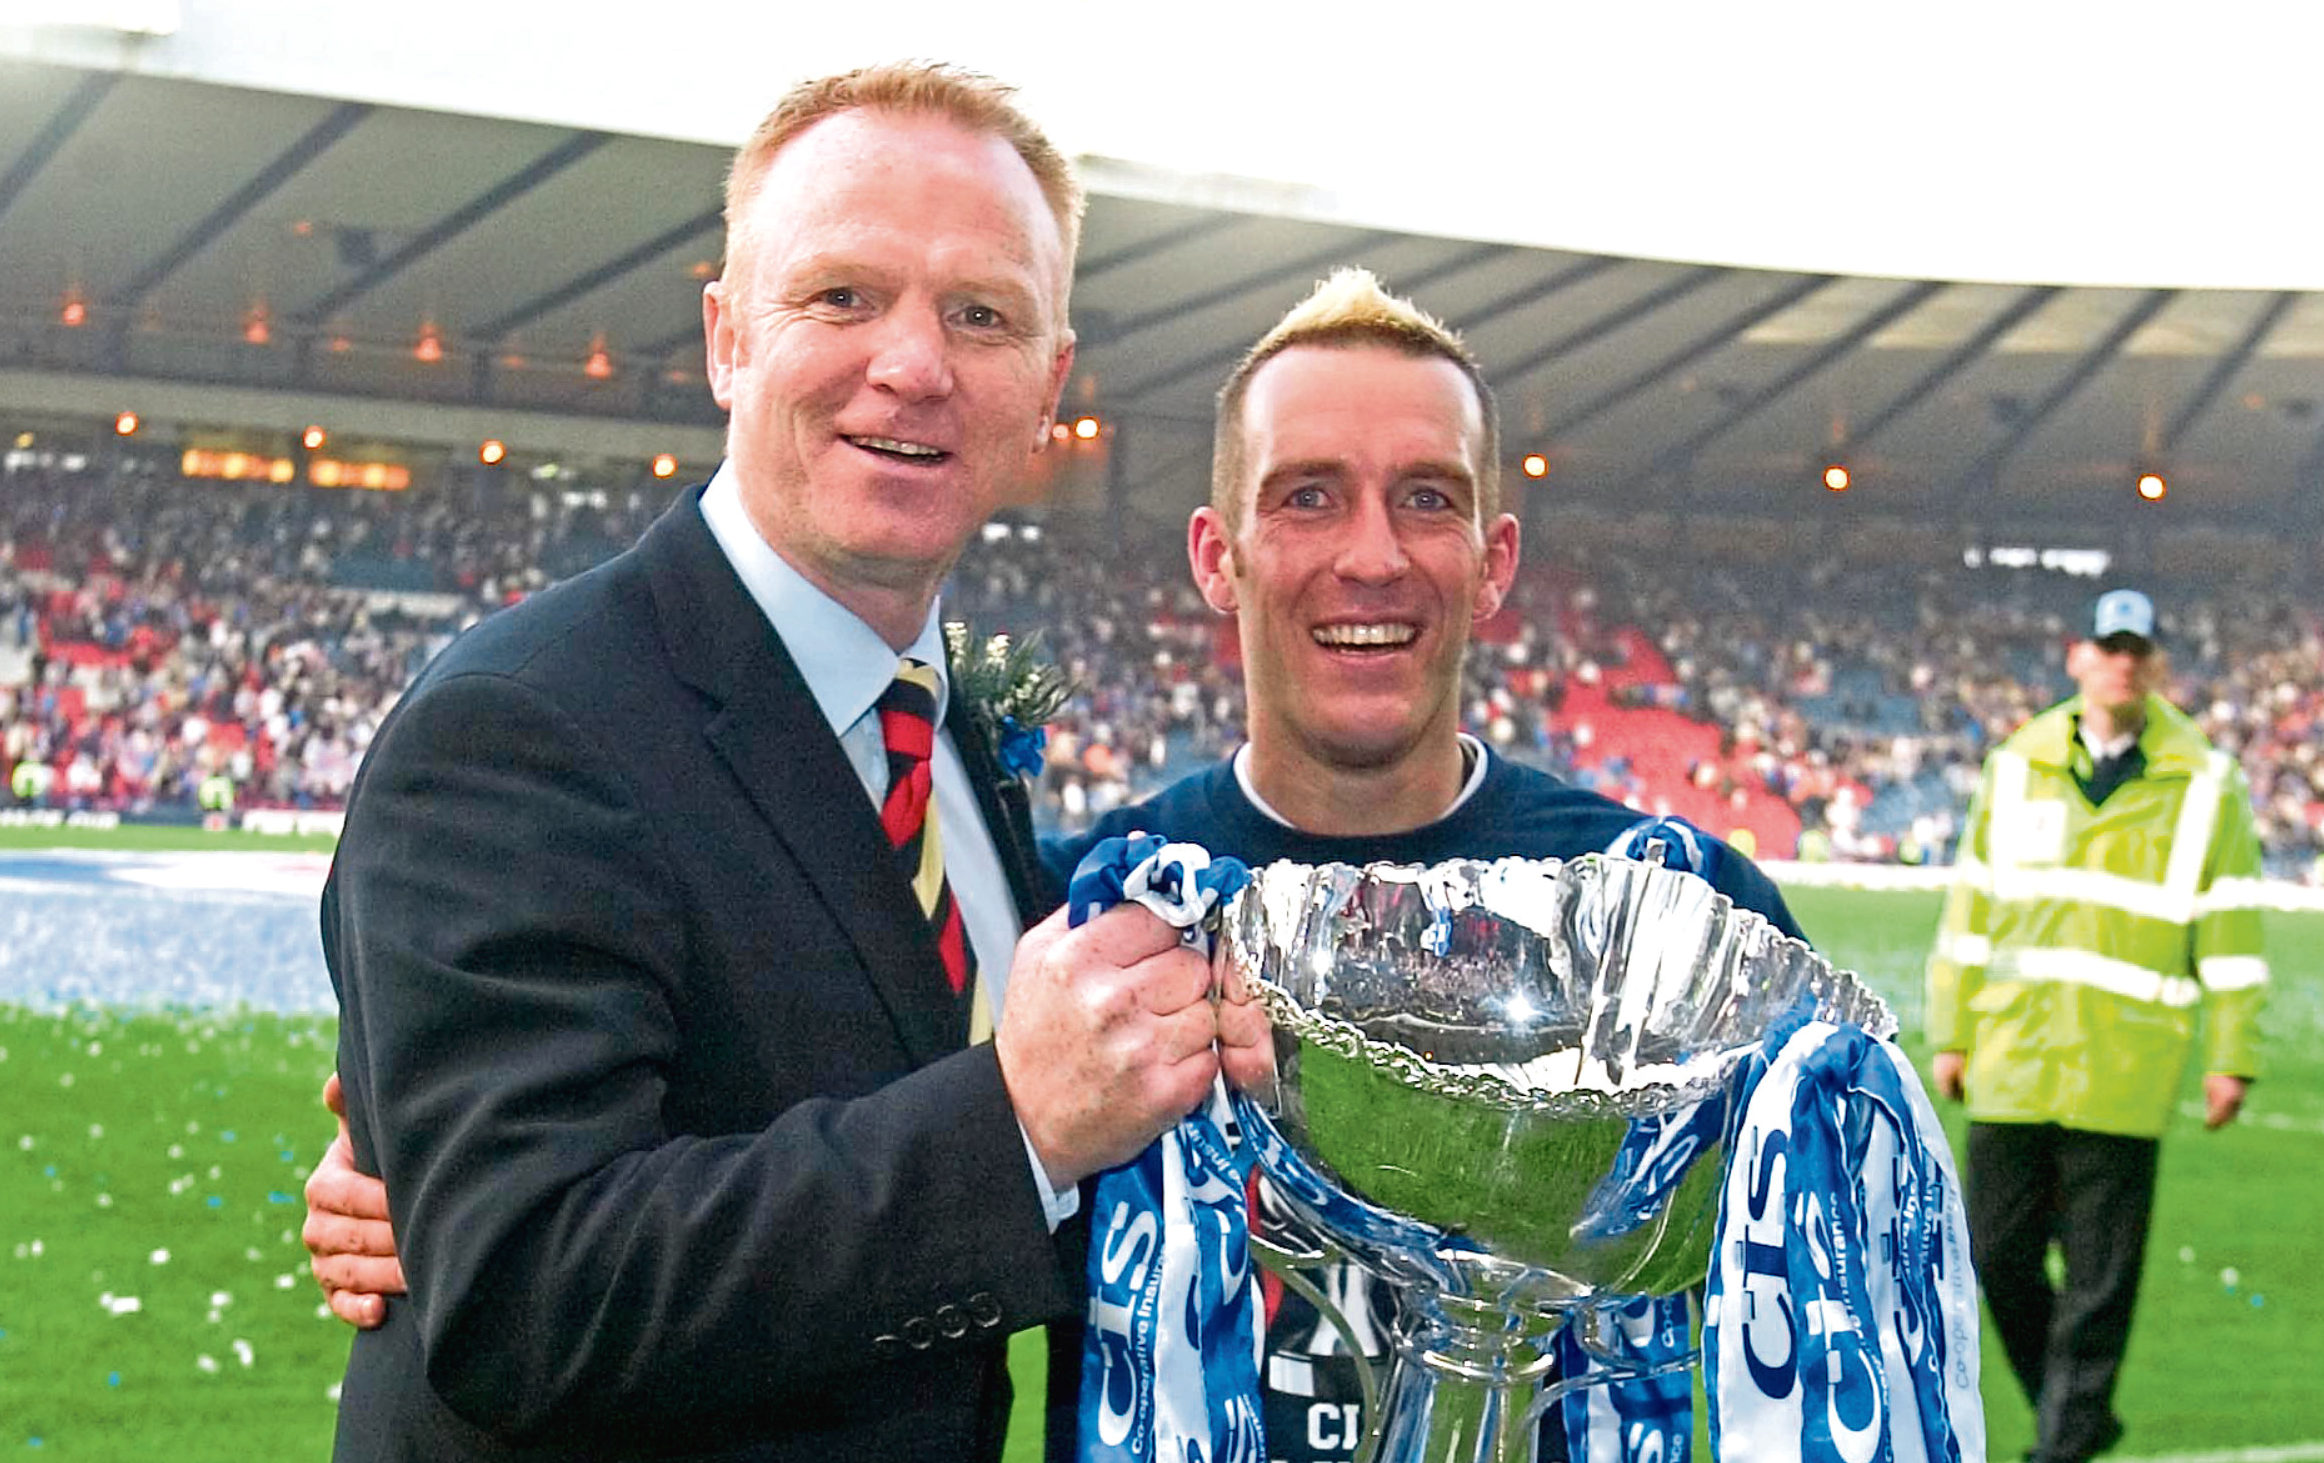 Rangers manager Alex McLeish (left) celebrates with skipper Fernando Ricksen after their CIS Cup win in 2005